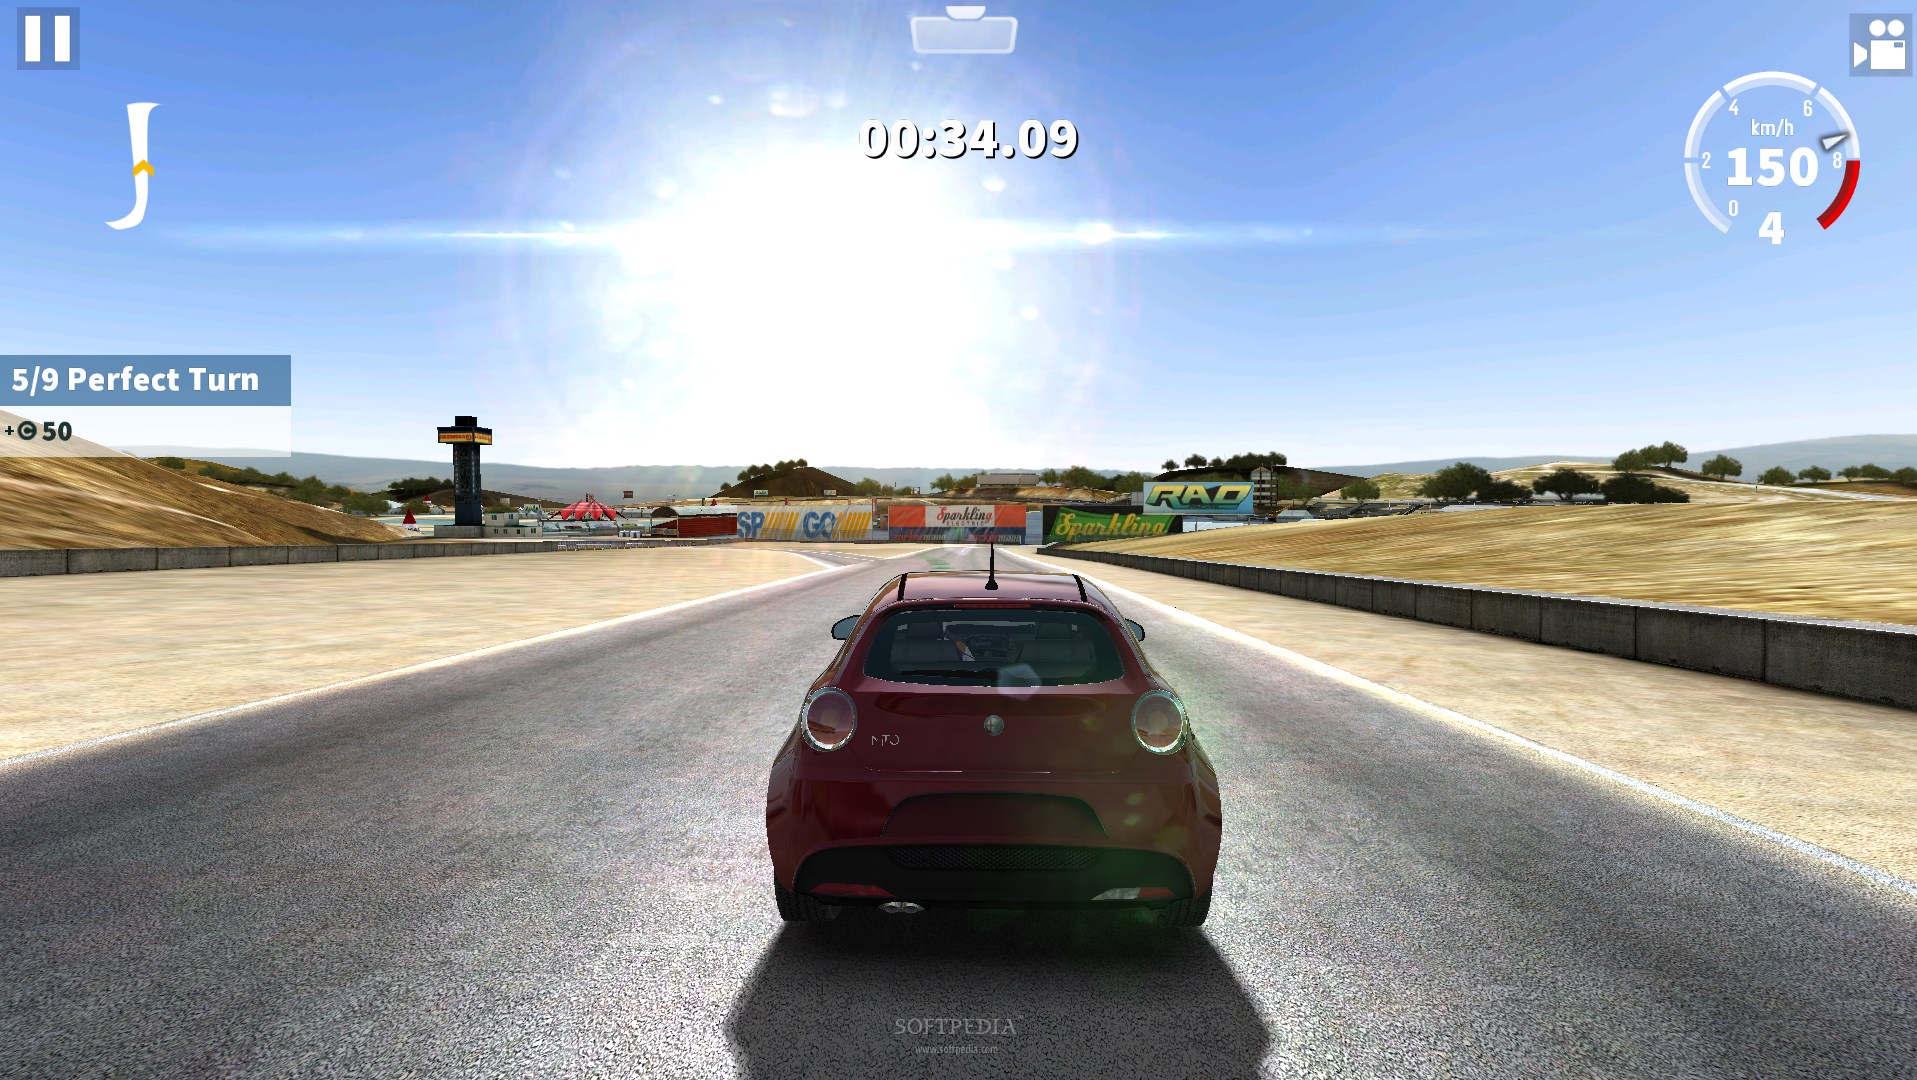 gt racing 2 game free download for pc windows 10